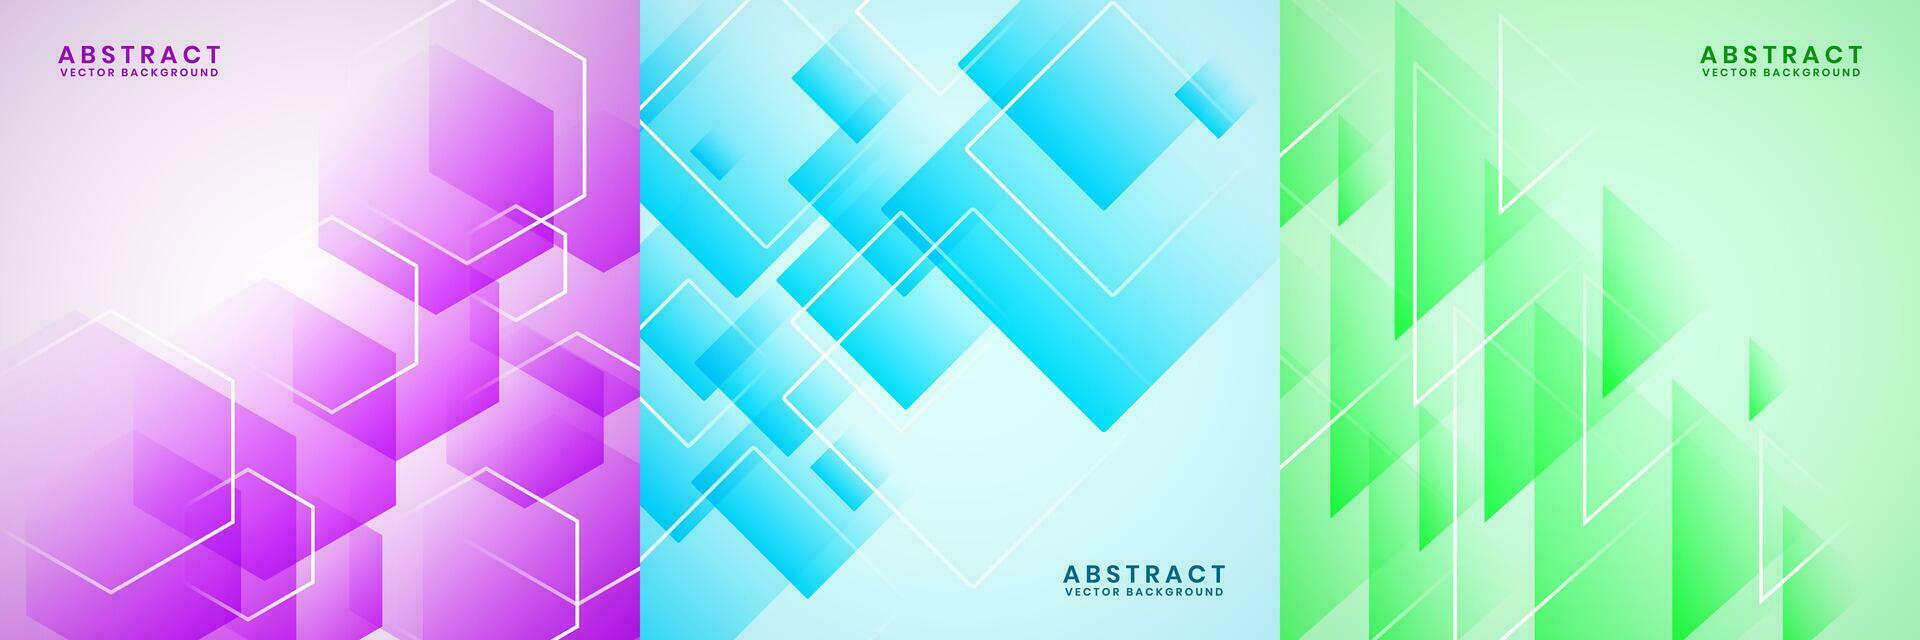 Modern abstract background set. Overlap layer on bright space with geometric shapes decoration. Minimalist graphic design element techno style concept for banner, flyer, card, or brochure cover vector